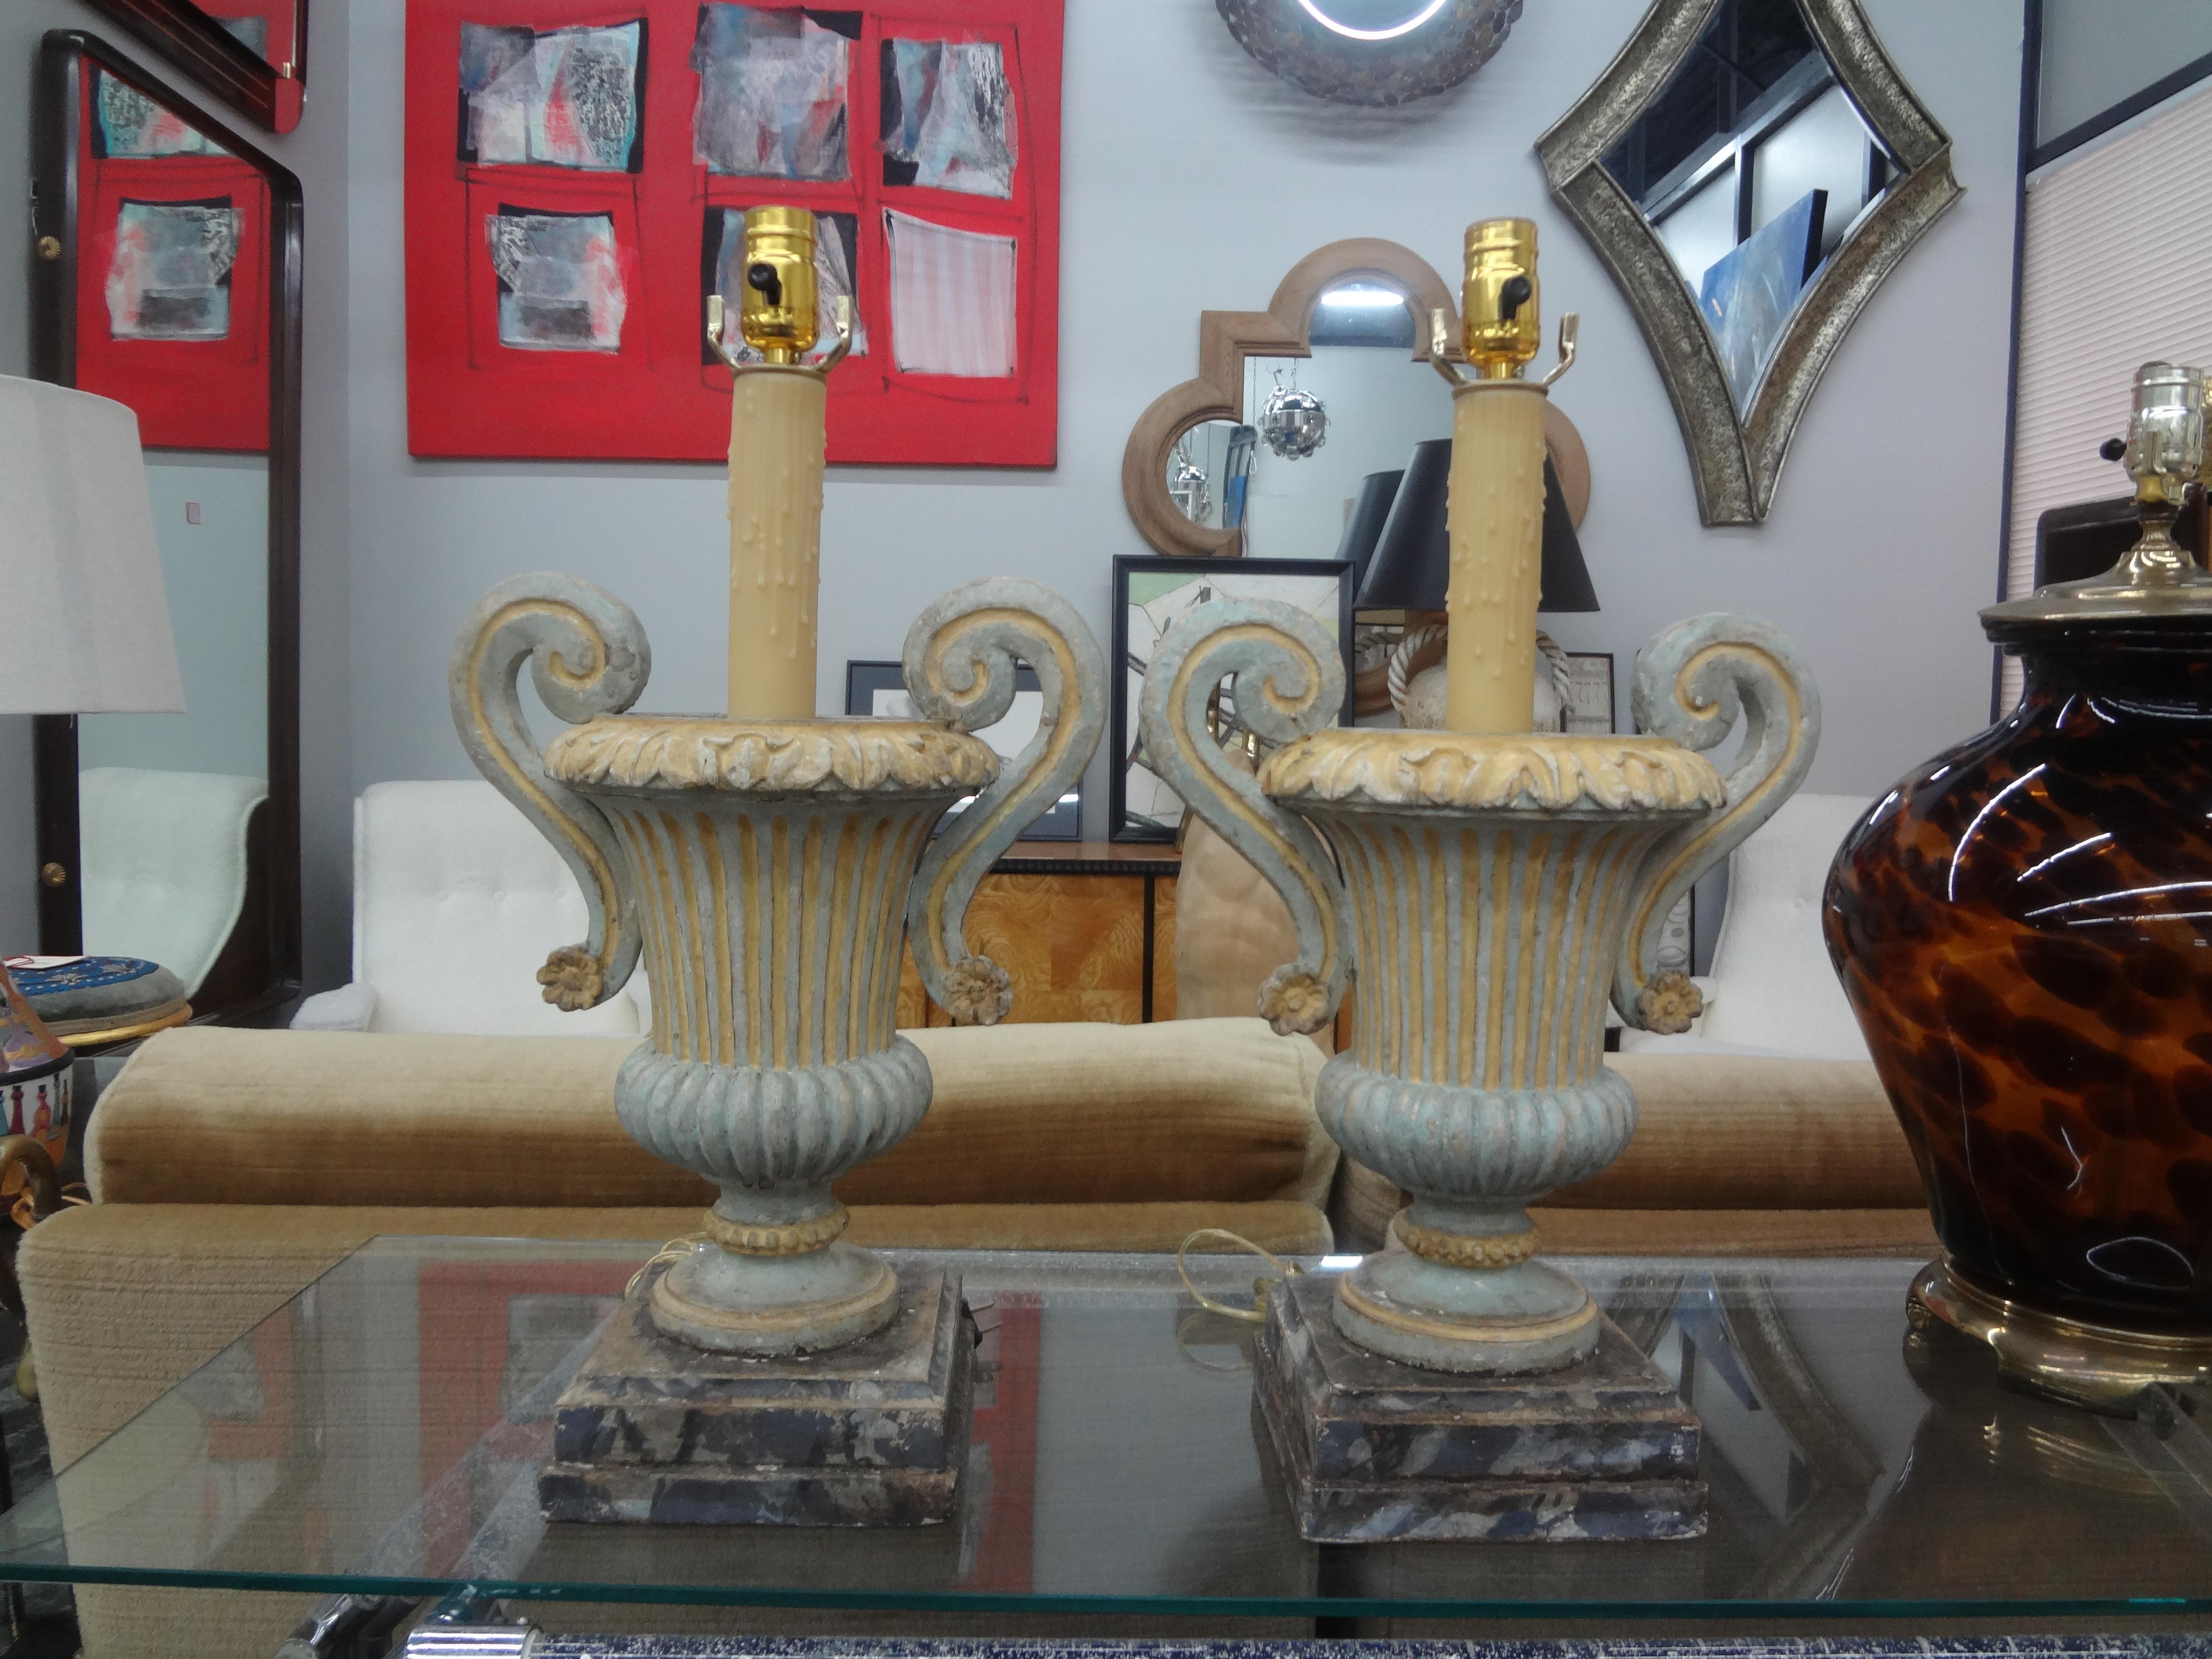 Pair of Italian painted urn form lamps.
Stunning pair of Italian painted or polychrome urn form lamps on faux marble bases that date to the 1920s.
This lovely pair of Italian Baroque style lamps have been newly wired with new sockets for the U.S.